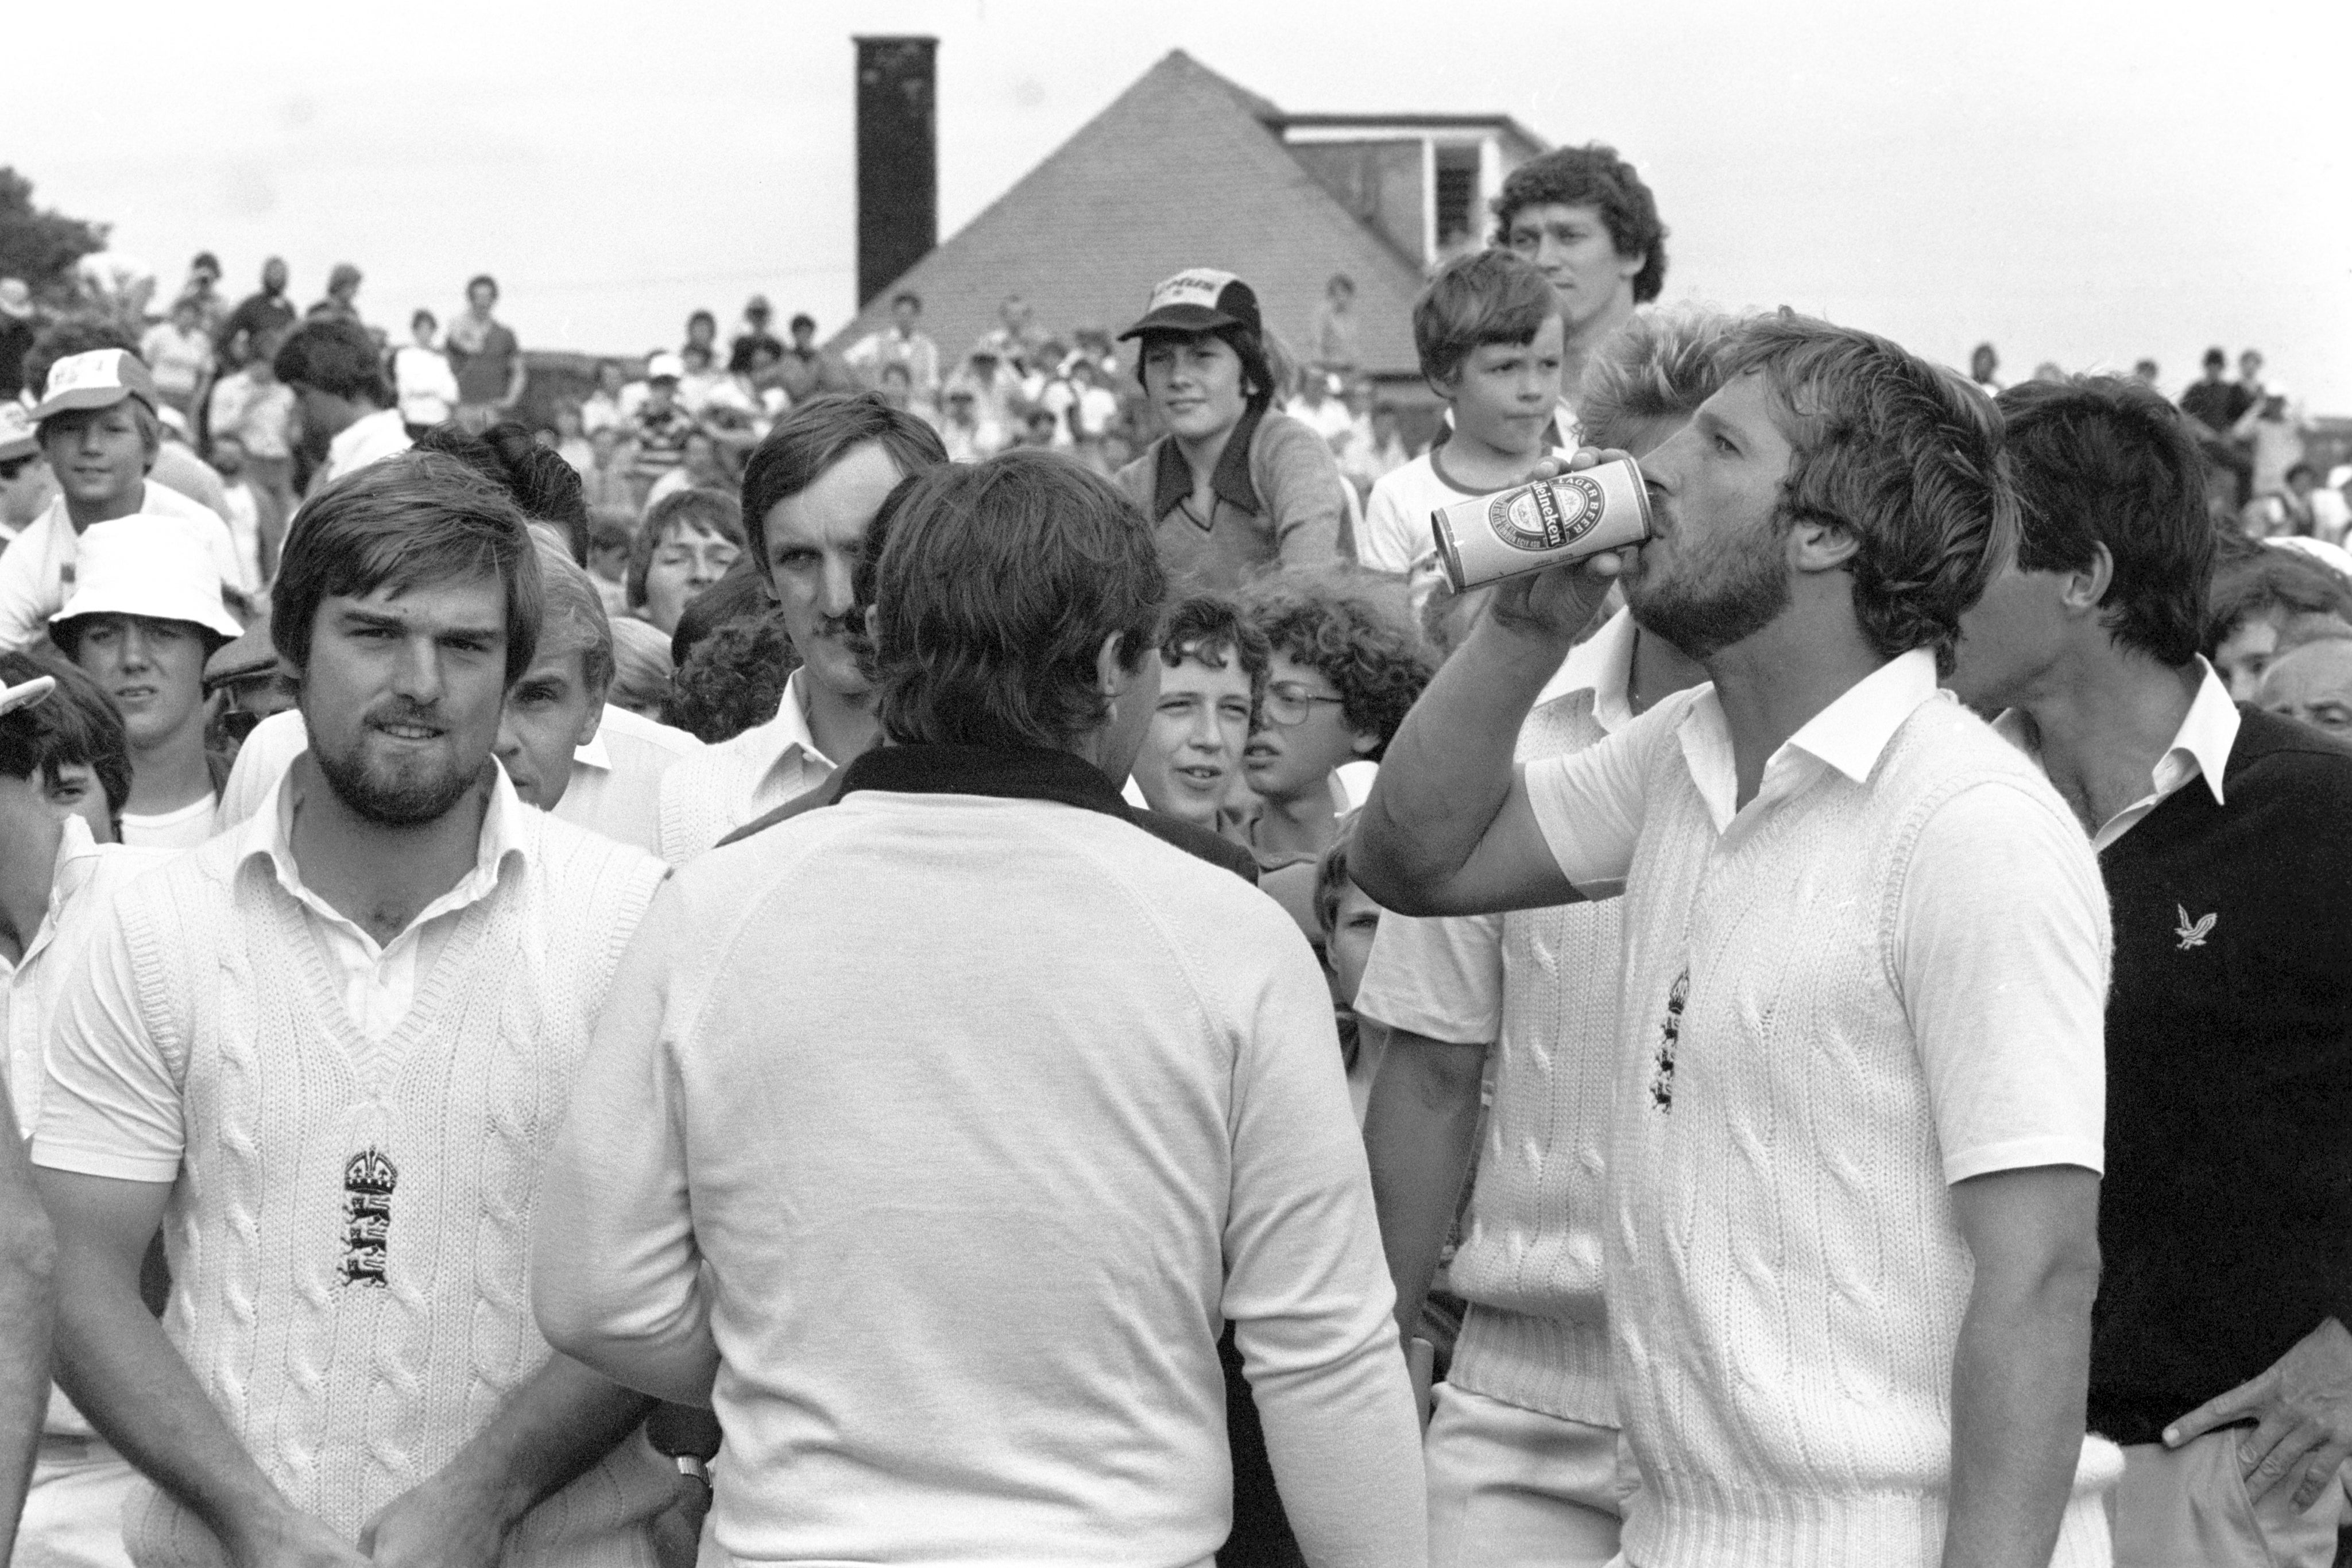 England hero Ian Botham downs a beer given to him by Marsh after the fifth Test (PA)